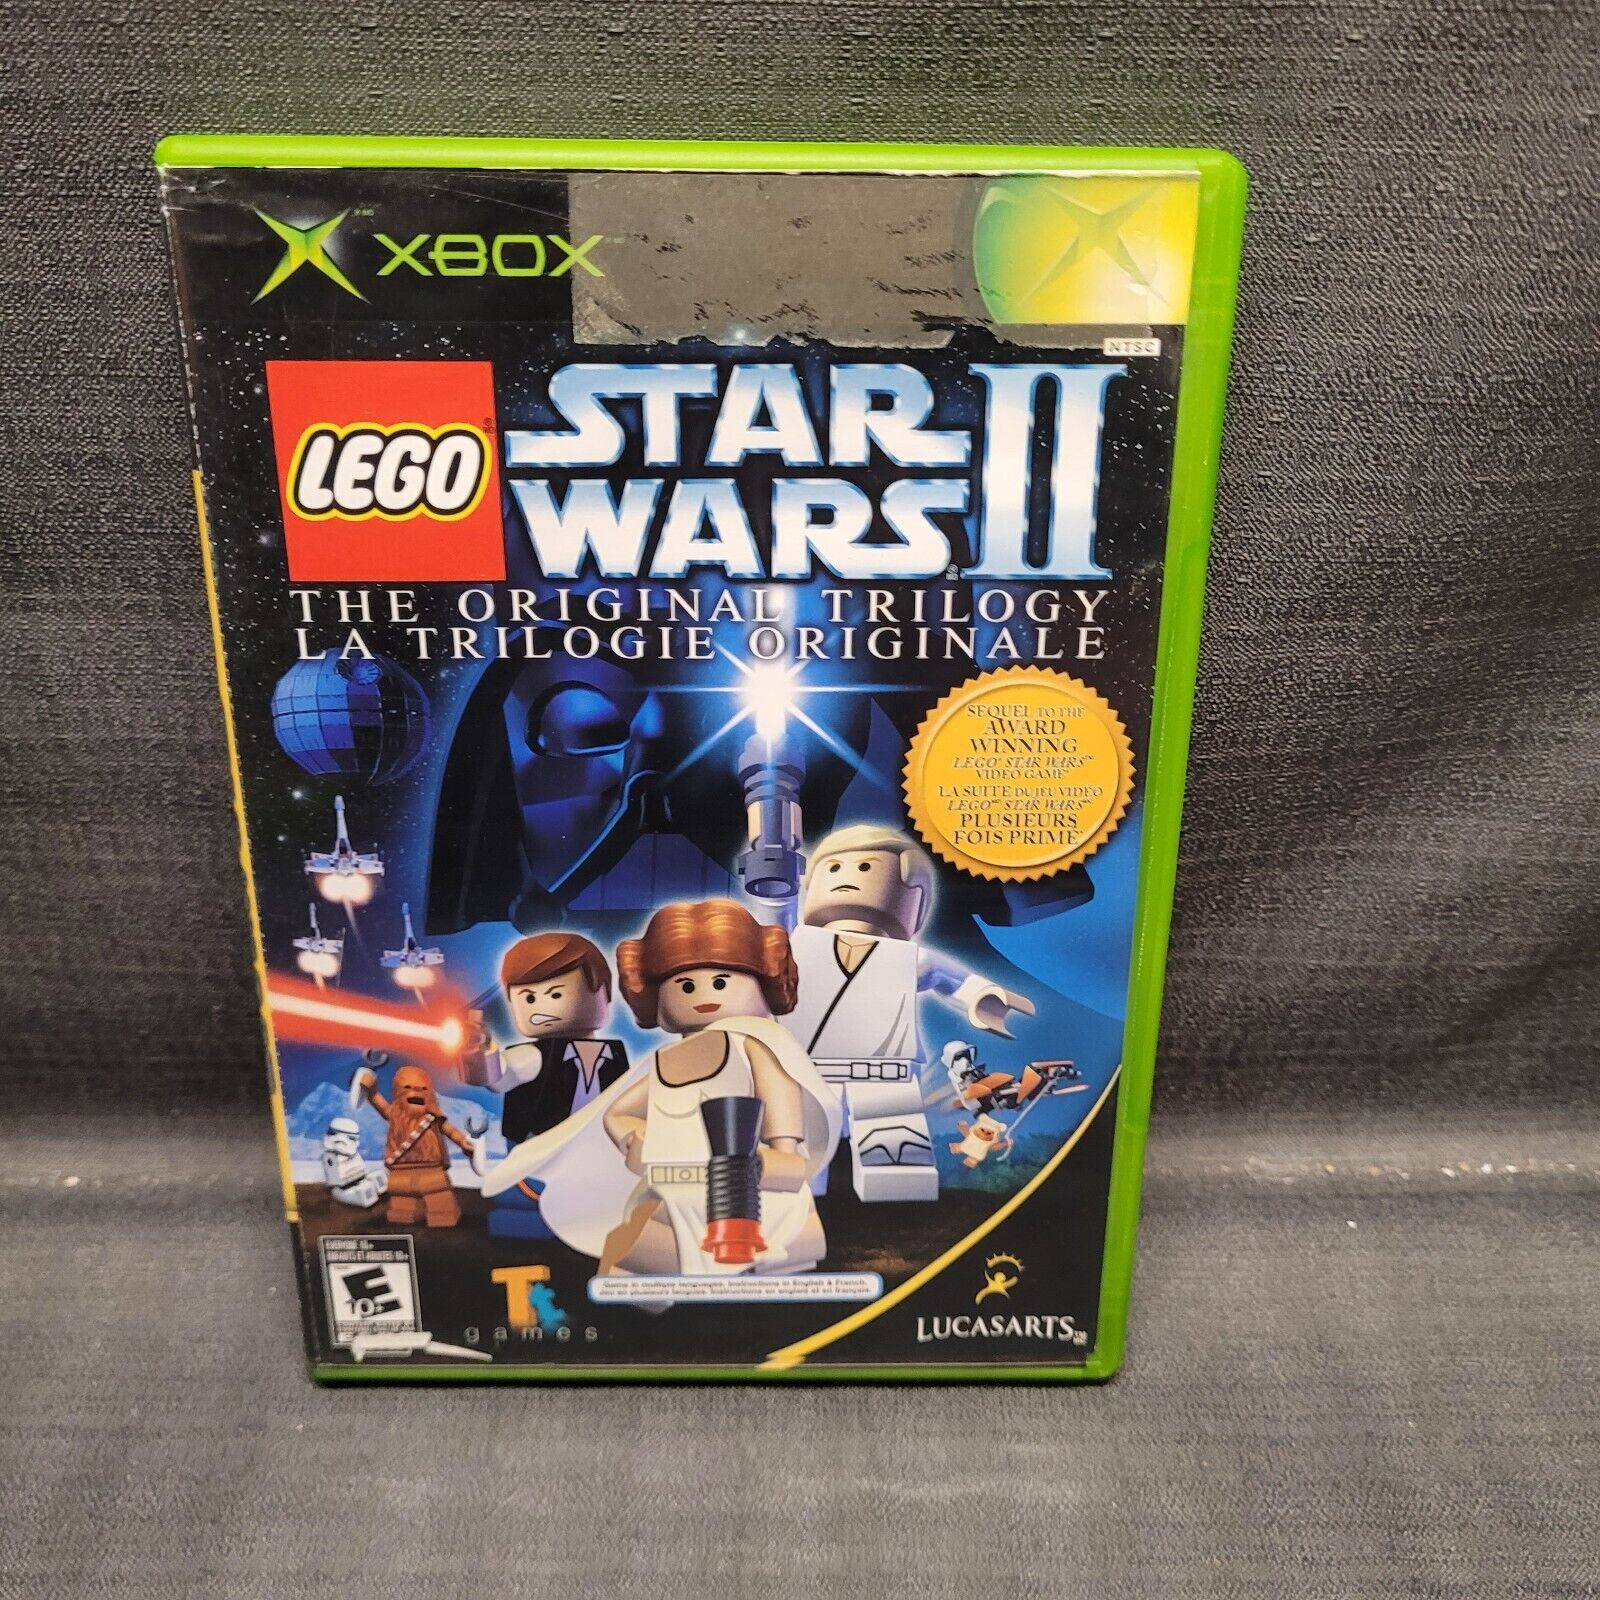 Primary image for LEGO Star Wars II 2: Original Trilogy (Microsoft Xbox 2006) Video Game